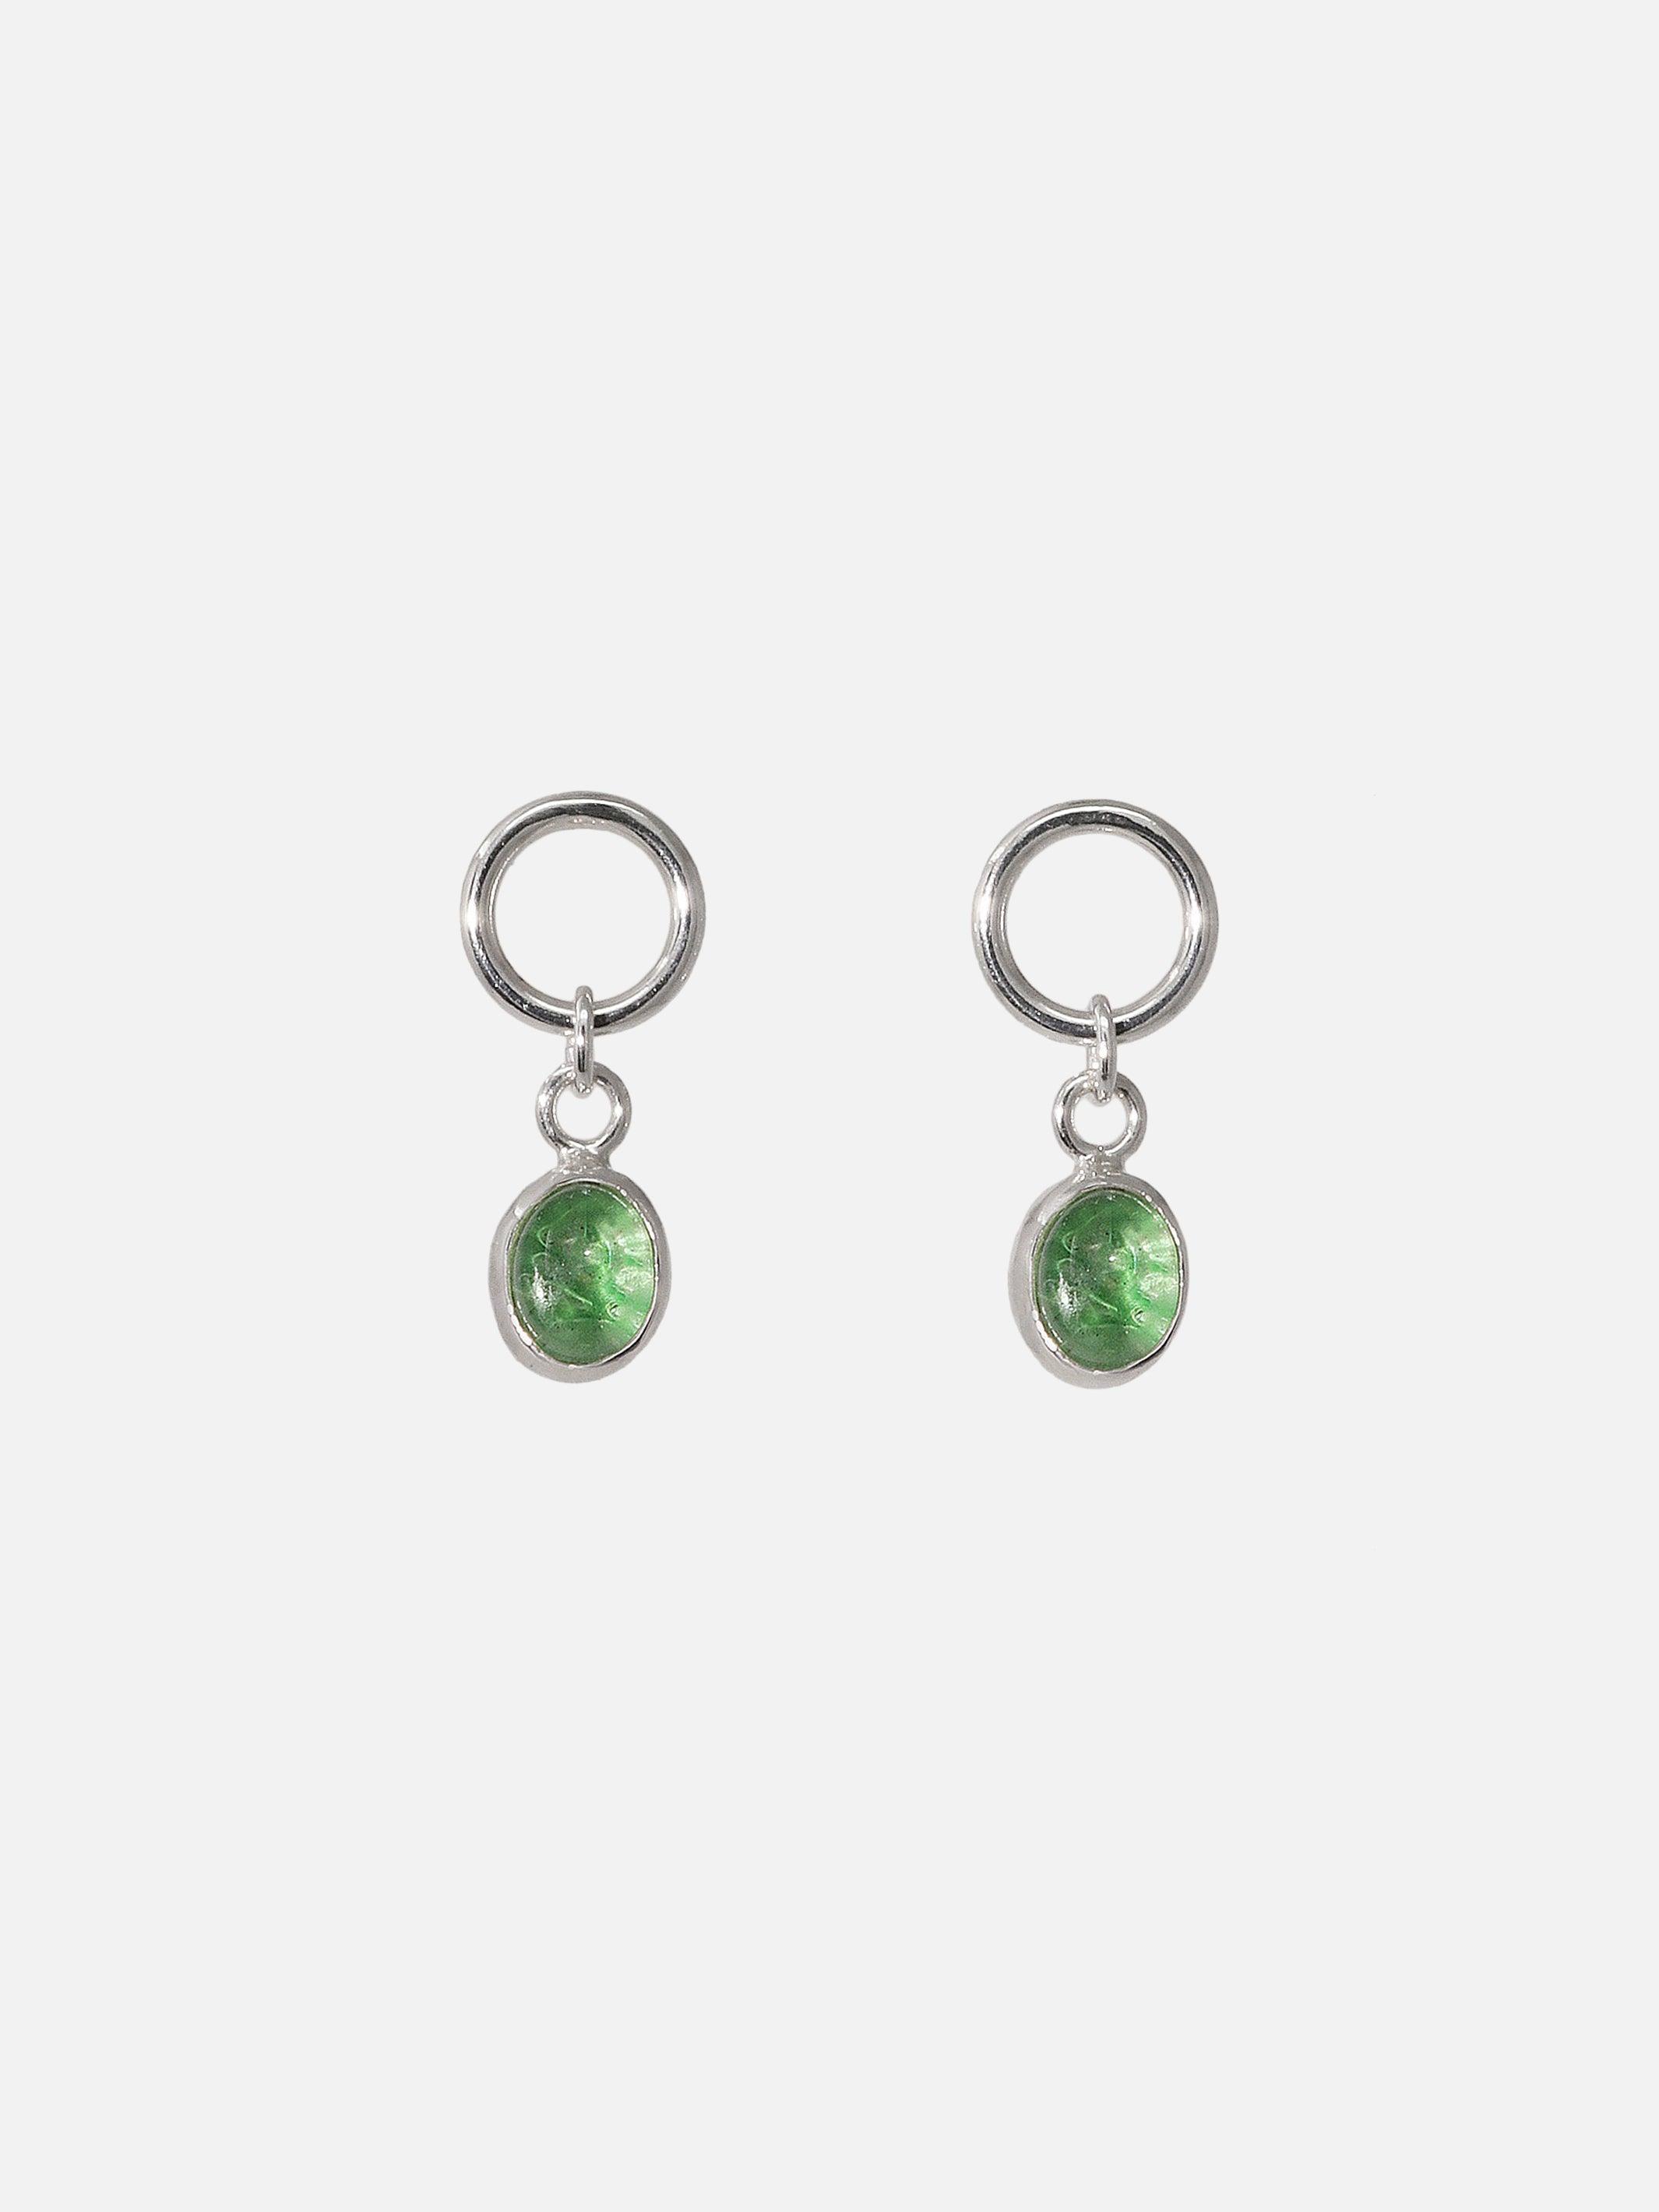 Oval Dangling Earrings - CLED - At Present